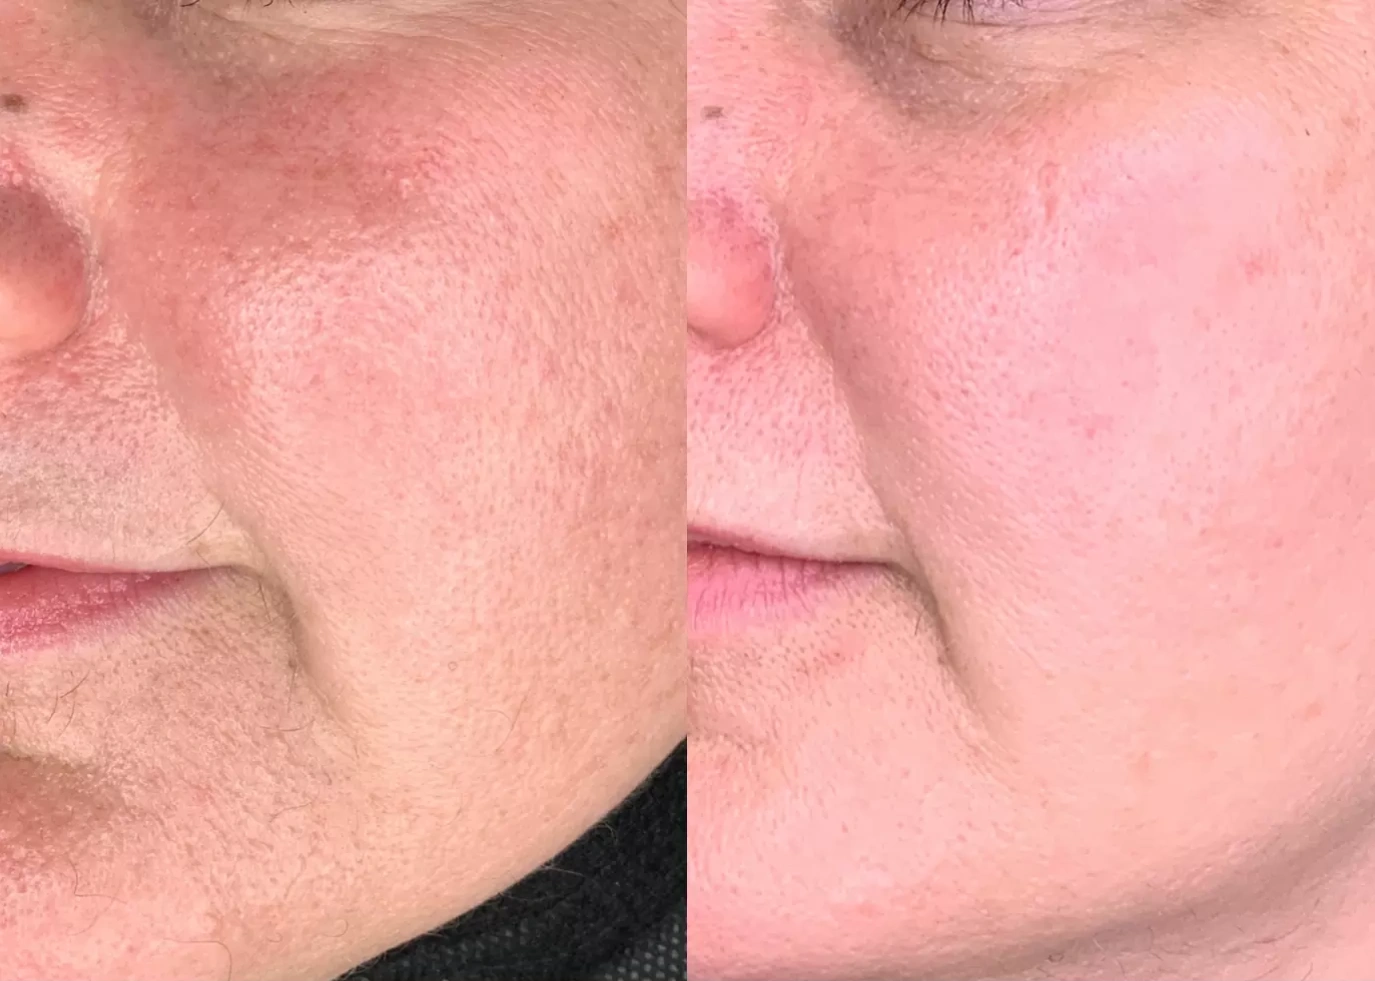 64b743f81b2ce361b9fd0bcf90475248 Pico Laser Before and After: Transforming Your Skin